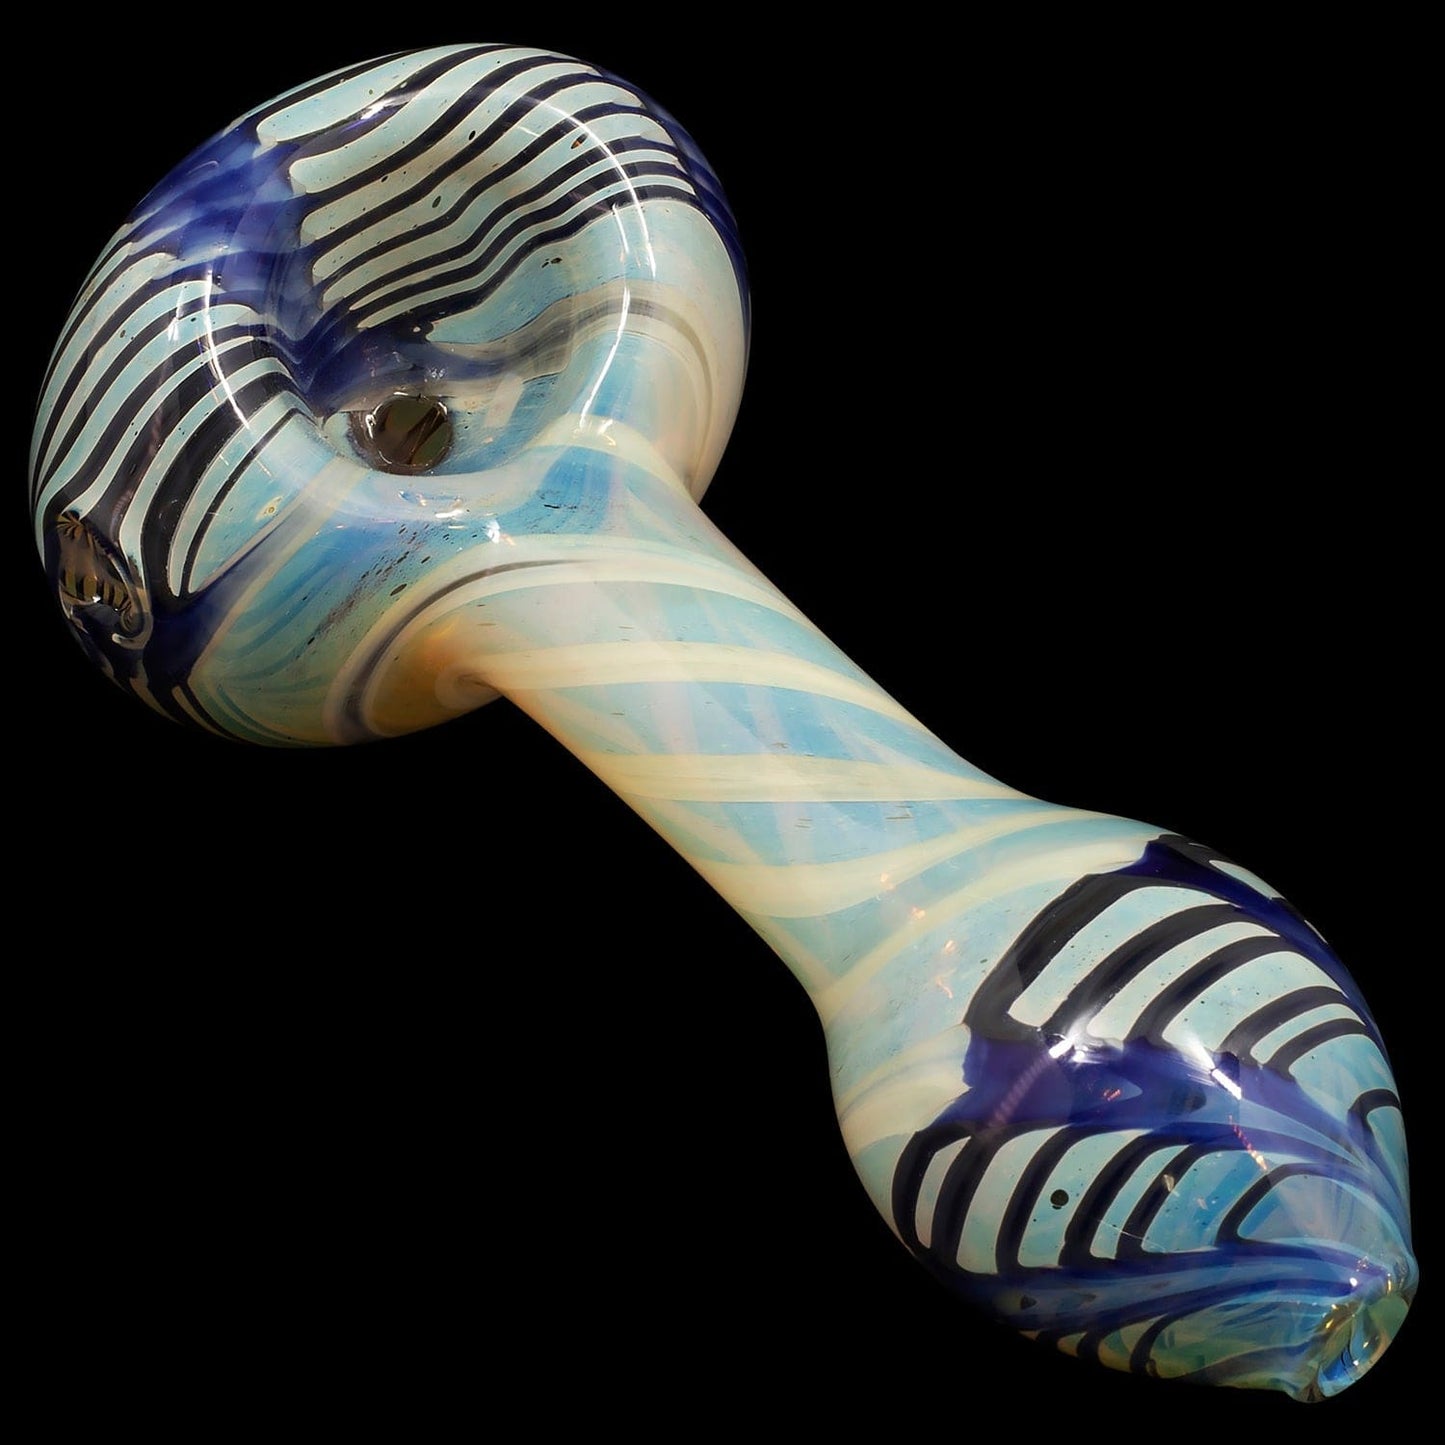 LA Pipes Hand Pipe Blue / 4.5 Inch "Twisty Cane" Spoon Glass Pipe (Various Colors)